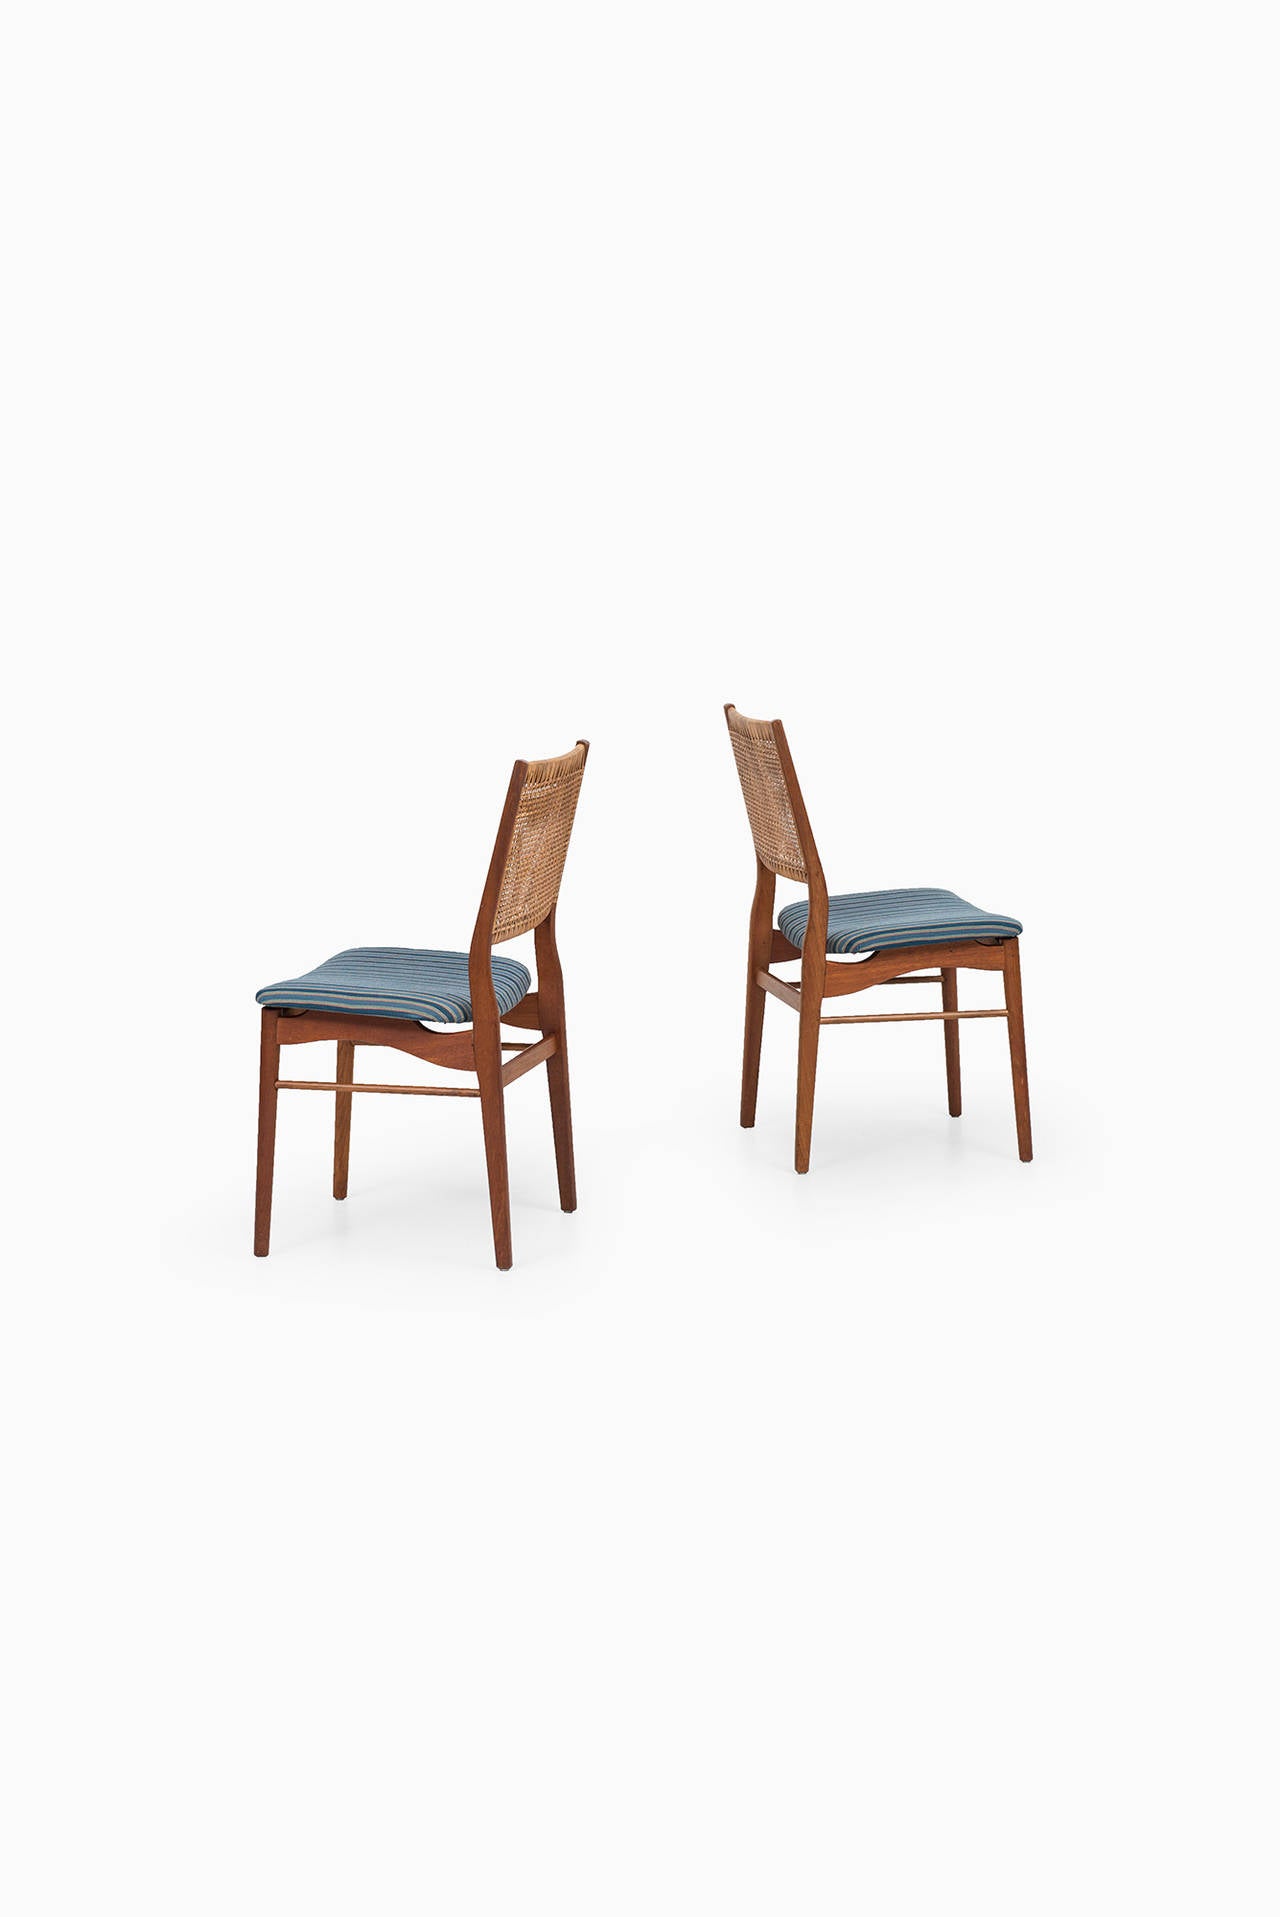 Cane Helge Sibast dining chairs model OS 2 by Sibast in Denmark